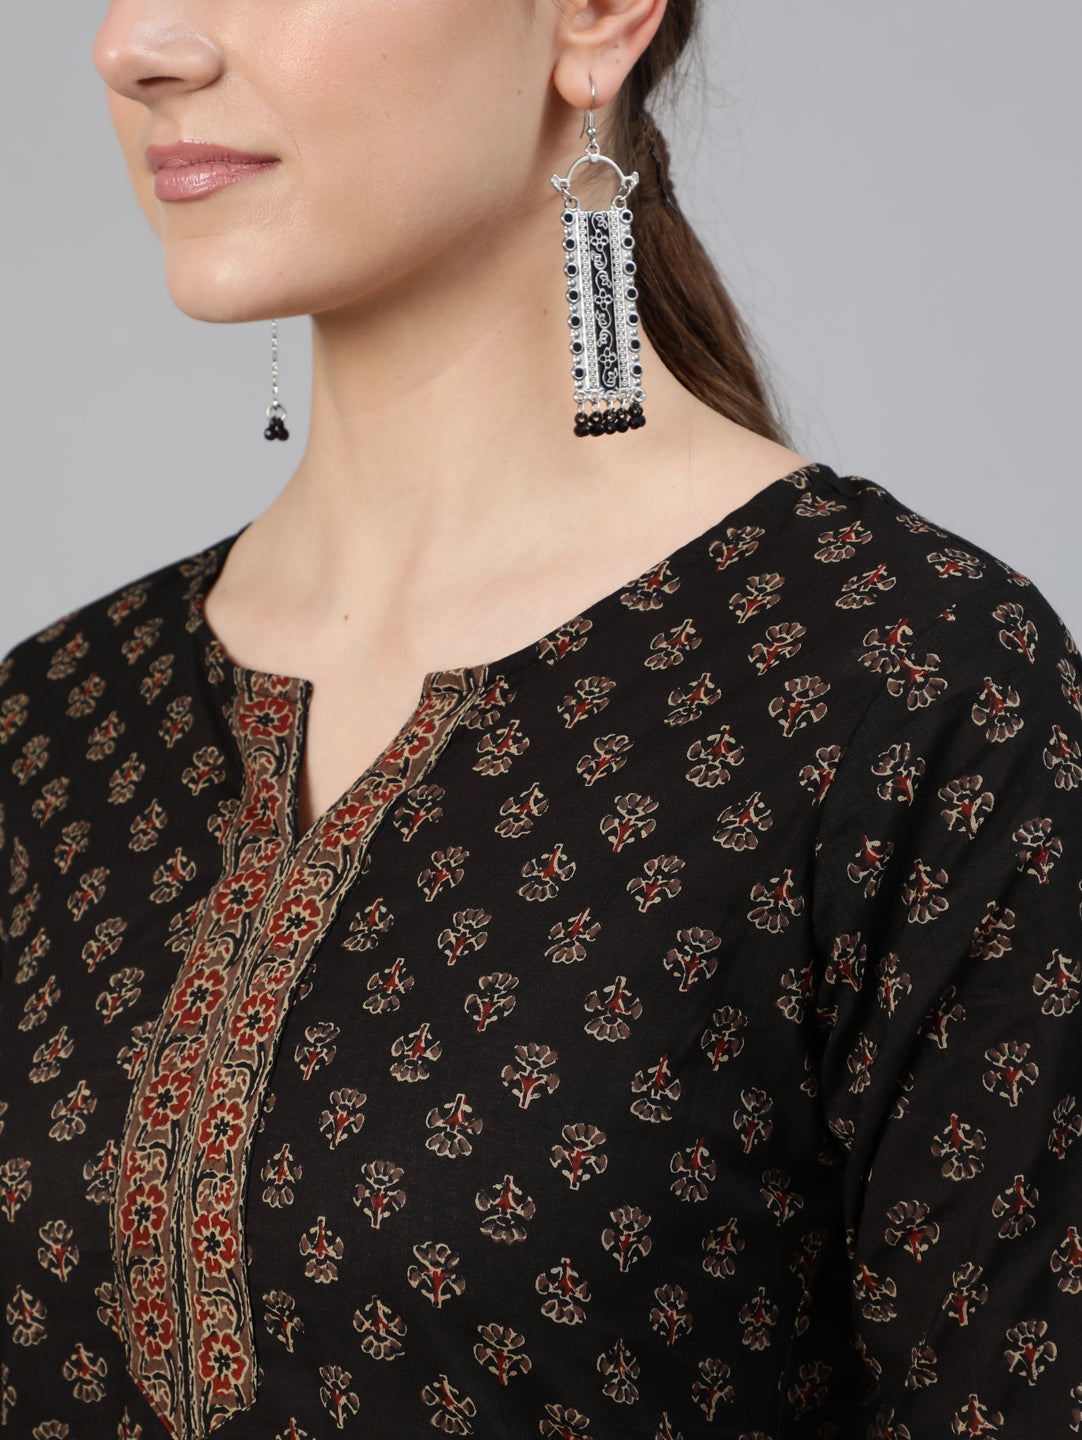 Women's Brown Printed Straight Tunic With Three Quarter Sleeves - Nayo Clothing